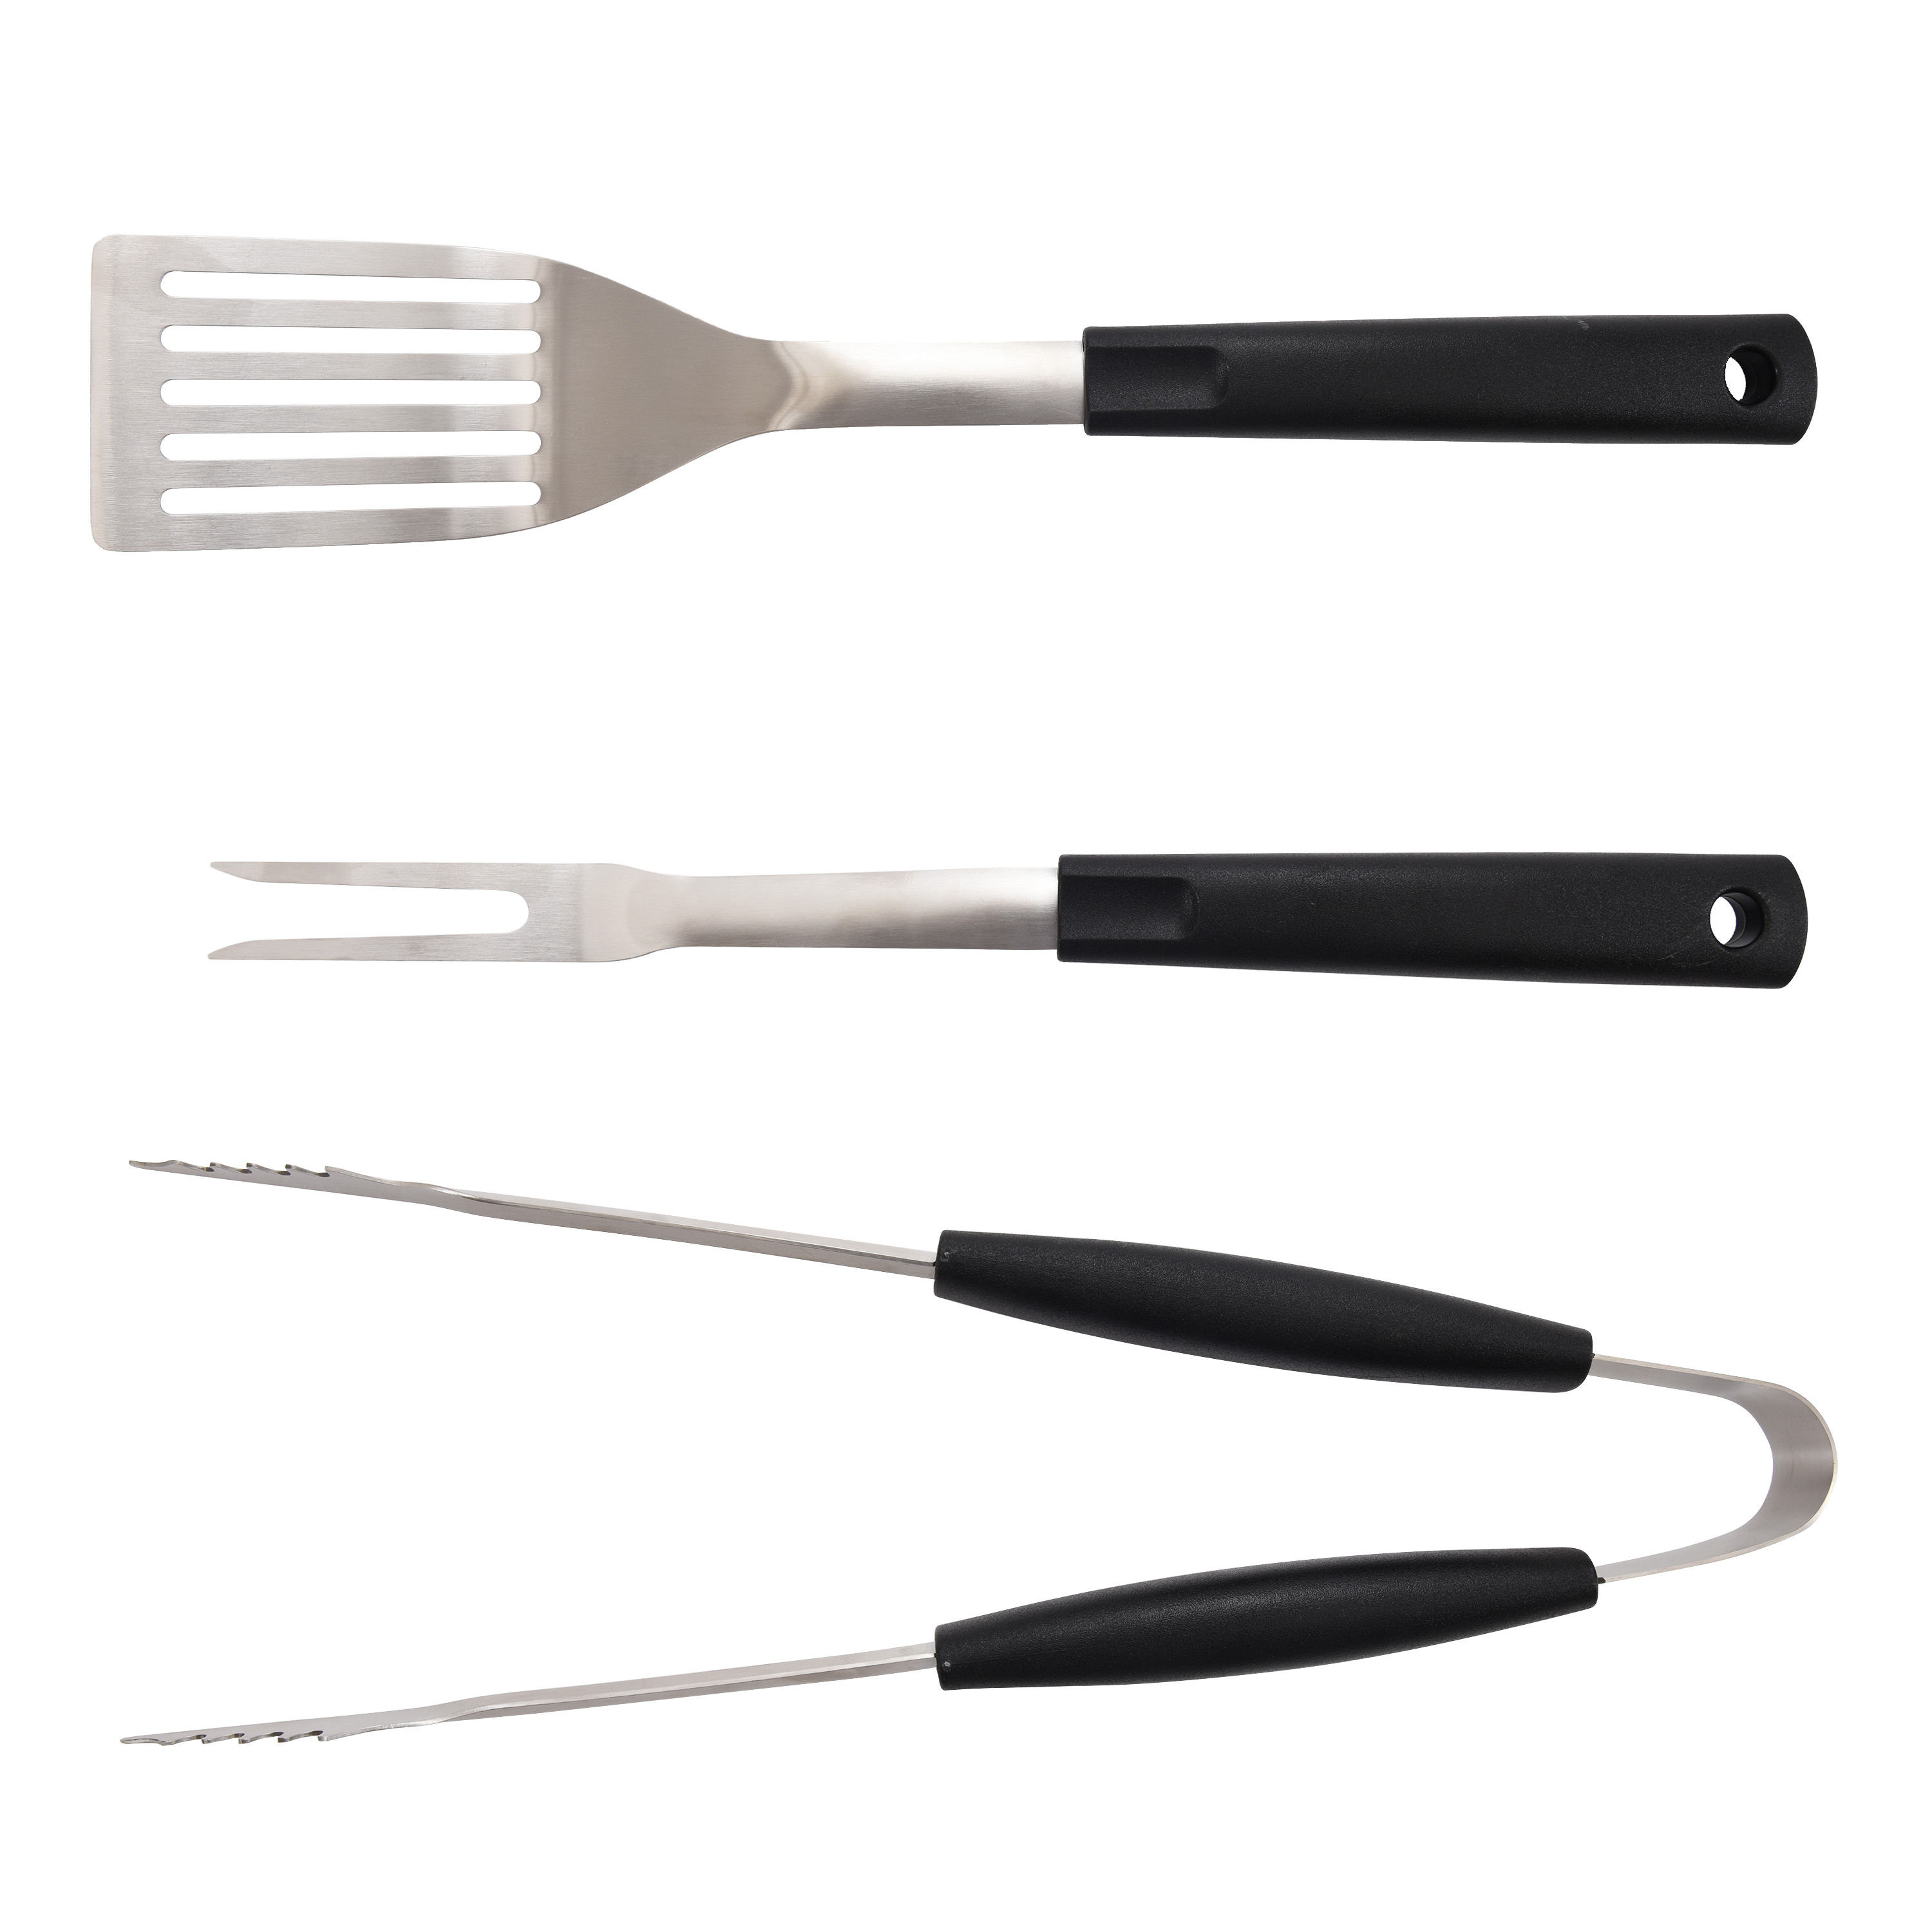 Mainstays 3 Piece Stainless Steel Barbecue Grill Tool Set - image 5 of 10